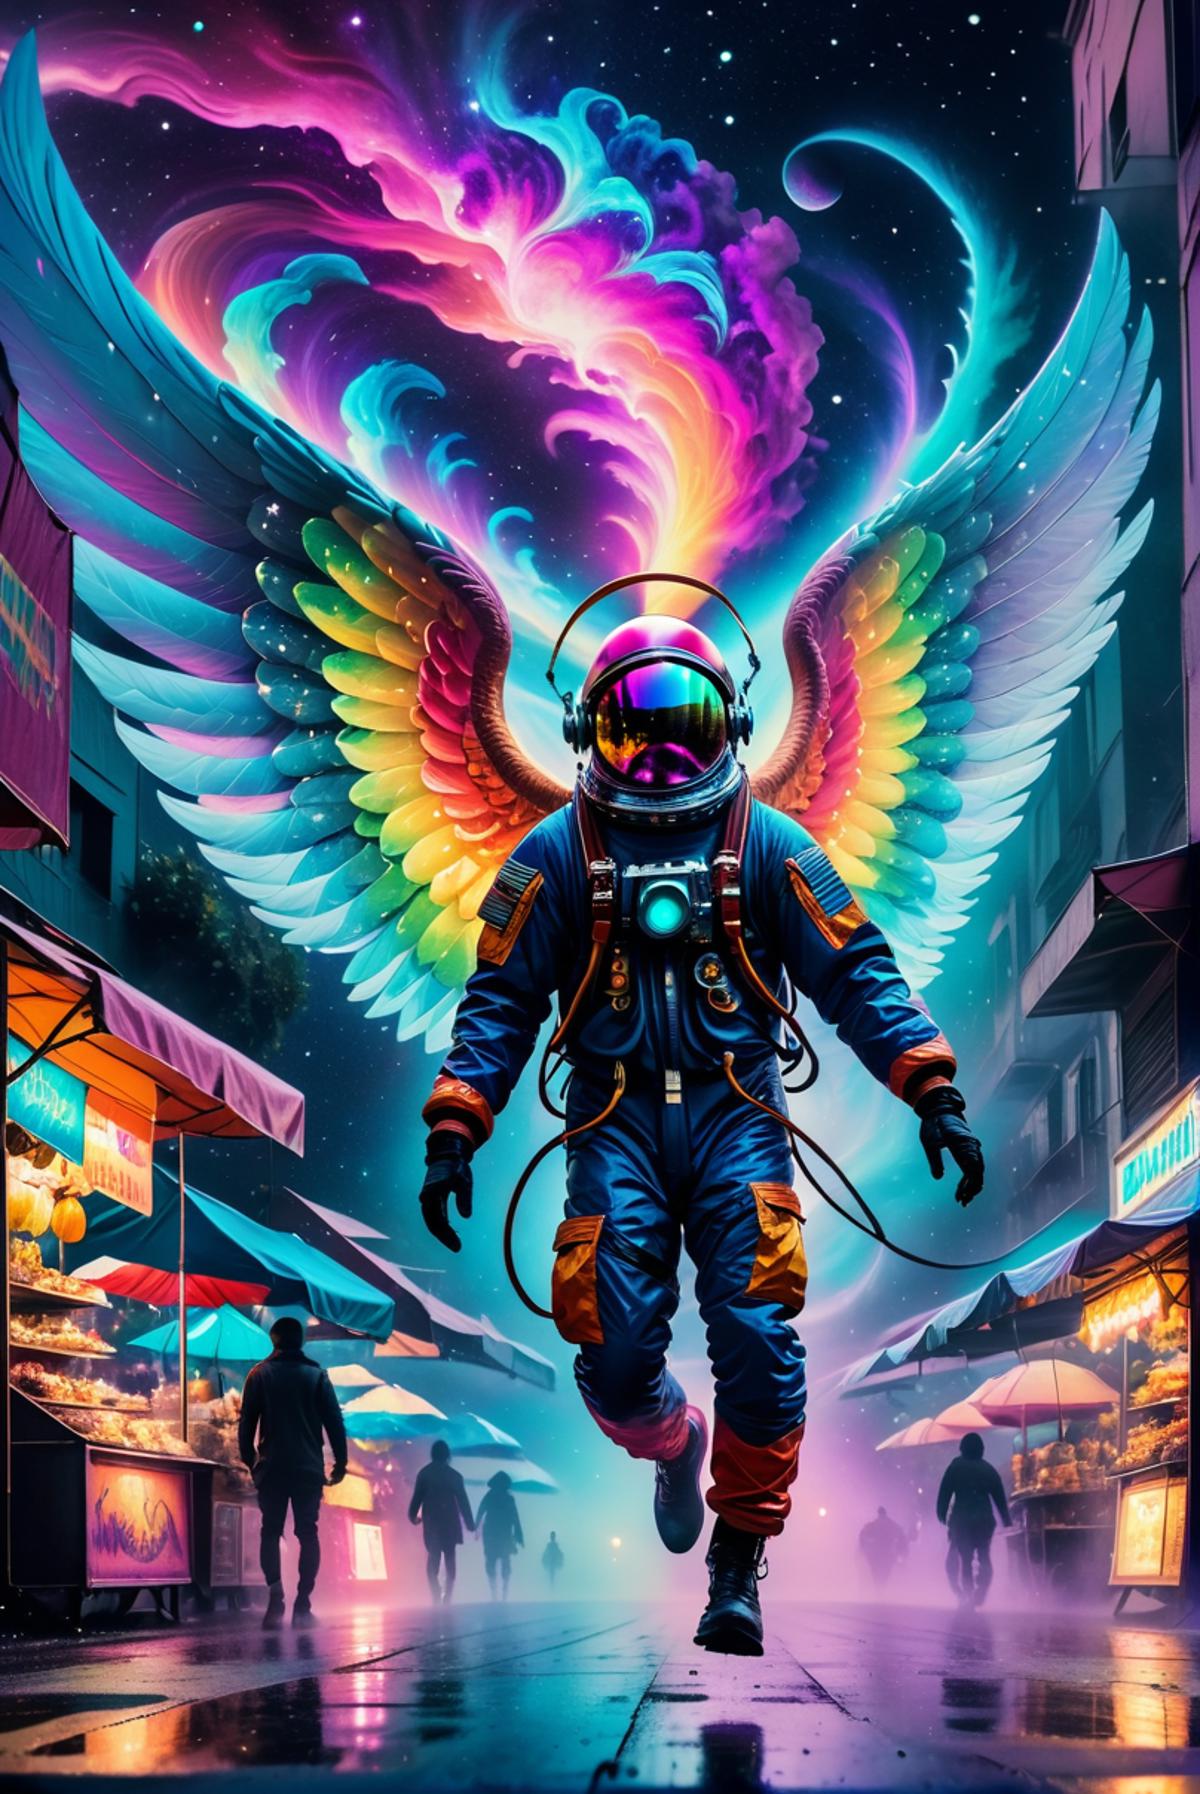 Astronaut with wings and rainbow colors.